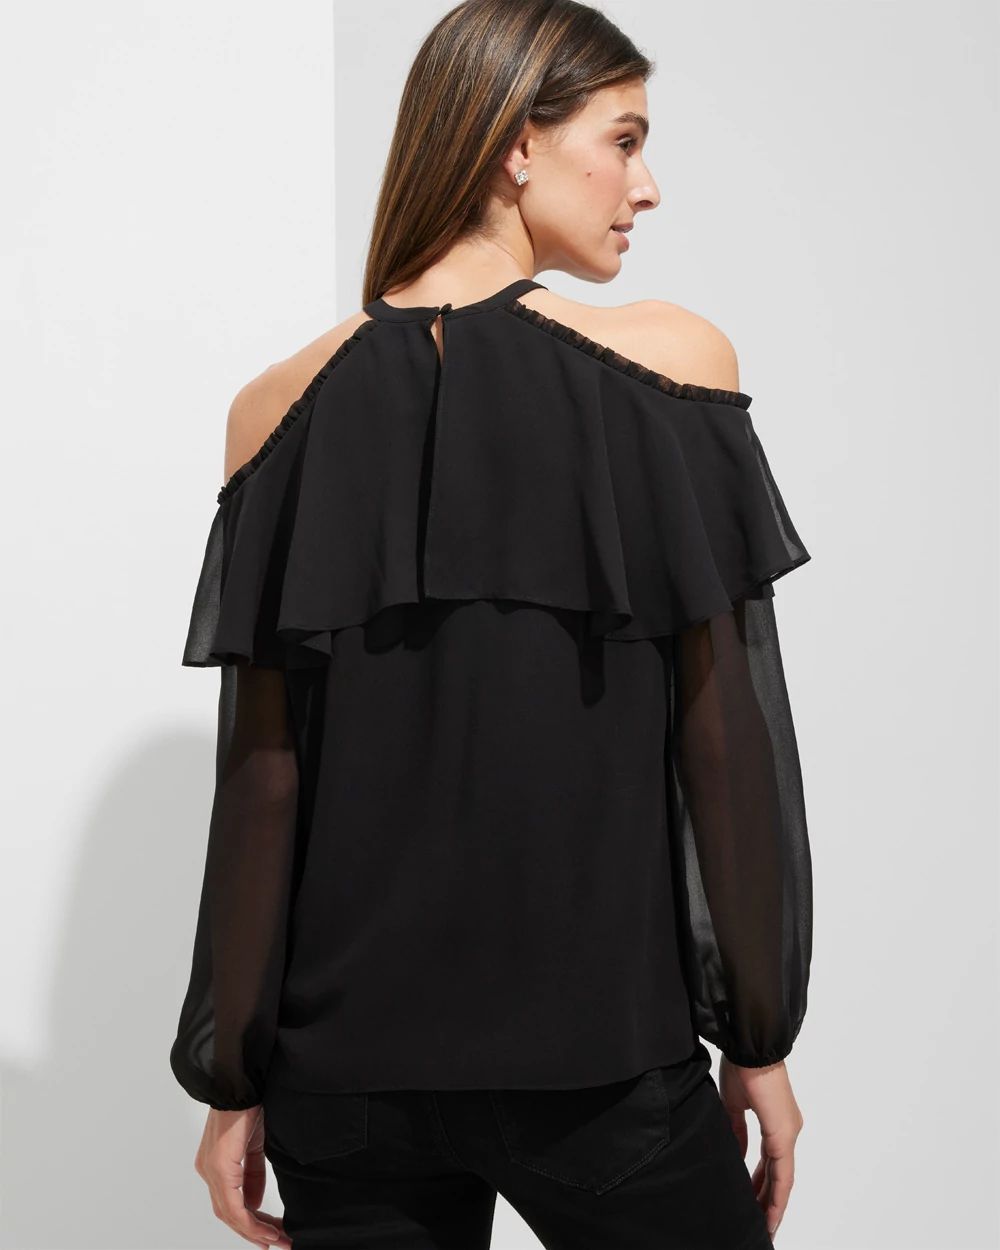 Outlet WHBM Long Sleeve Cold Shoulder Blouse click to view larger image.